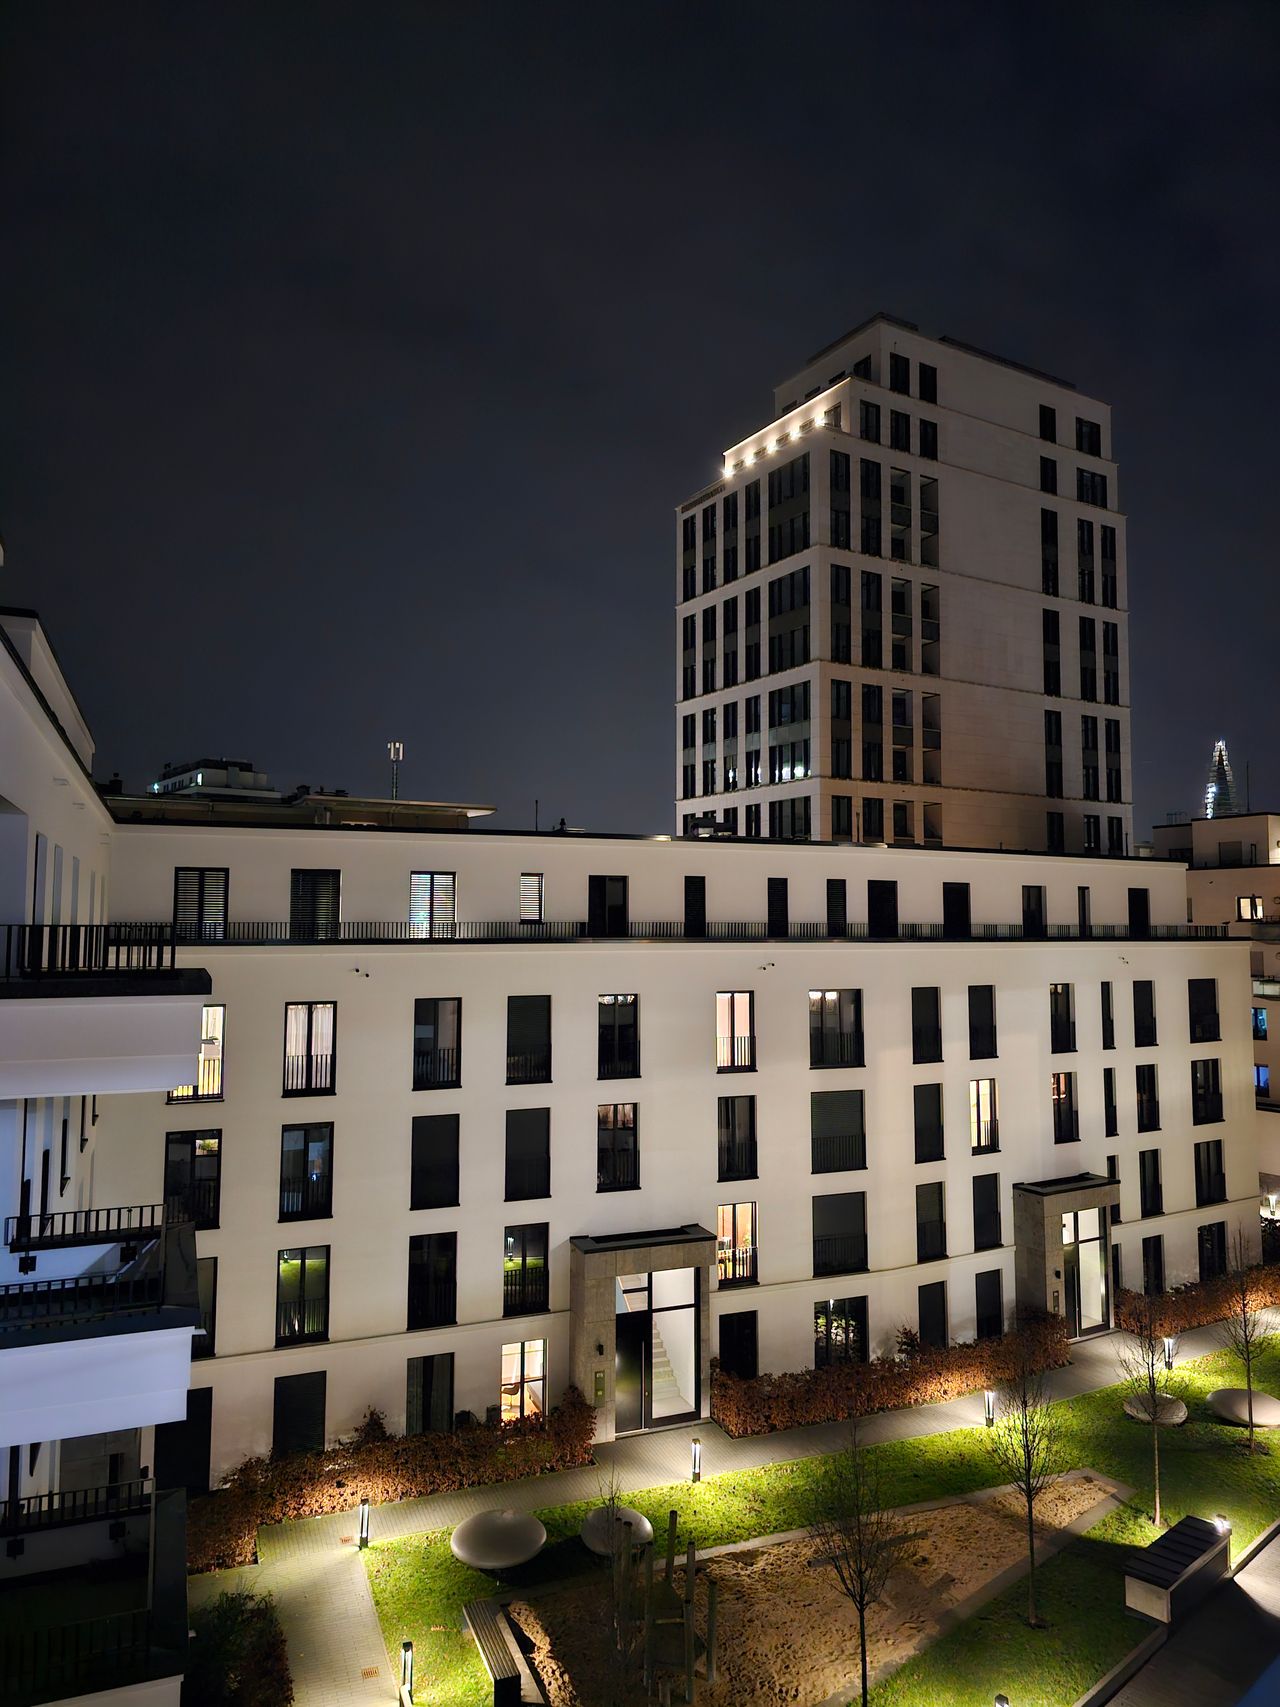 2 bedrooms, 2 bathrooms, 1 living room, furnished new apartment in the center of Düsseldorf